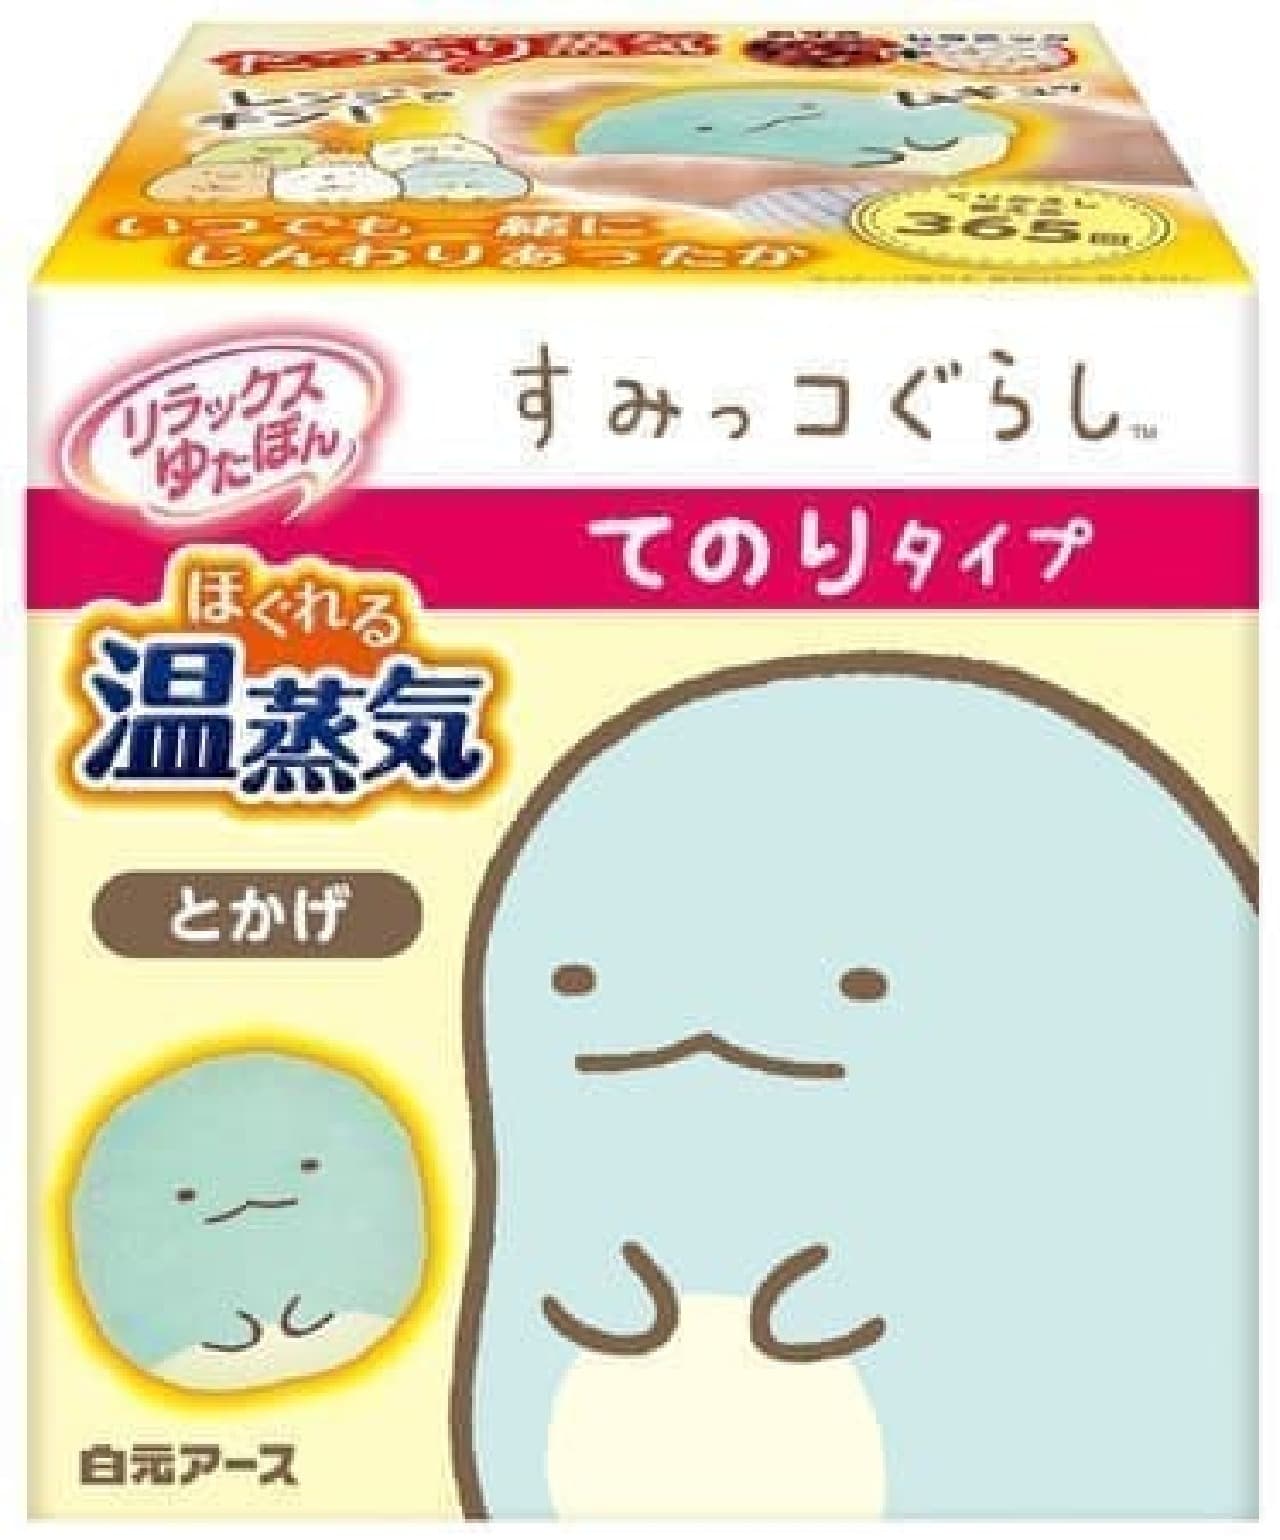 Released "Relaxing Yutapon Tenori Type Unraveling Warm Steam Sumikko Gurashi Tokage" --Hand warmer compatible with microwave ovens